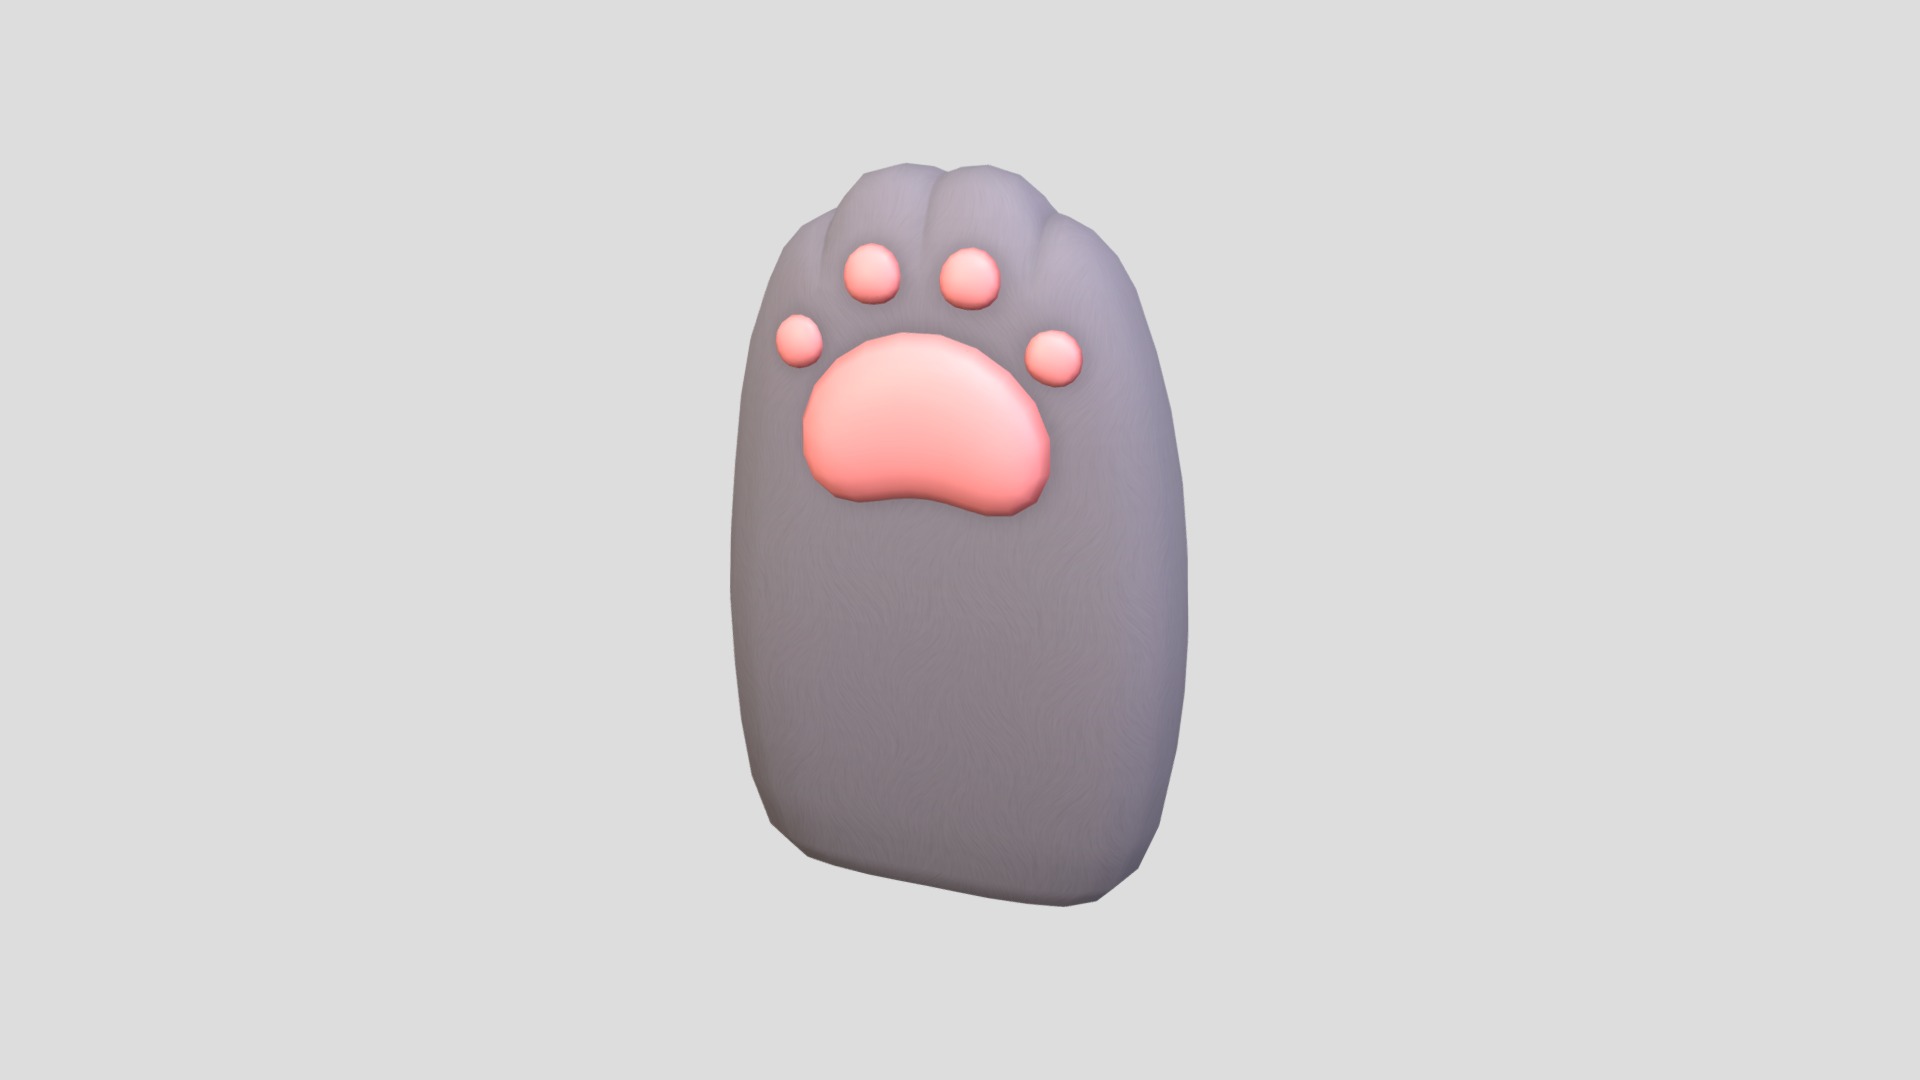 3D model Cat Paws - This is a 3D model of the Cat Paws. The 3D model is about a purple dice with a heart on it.